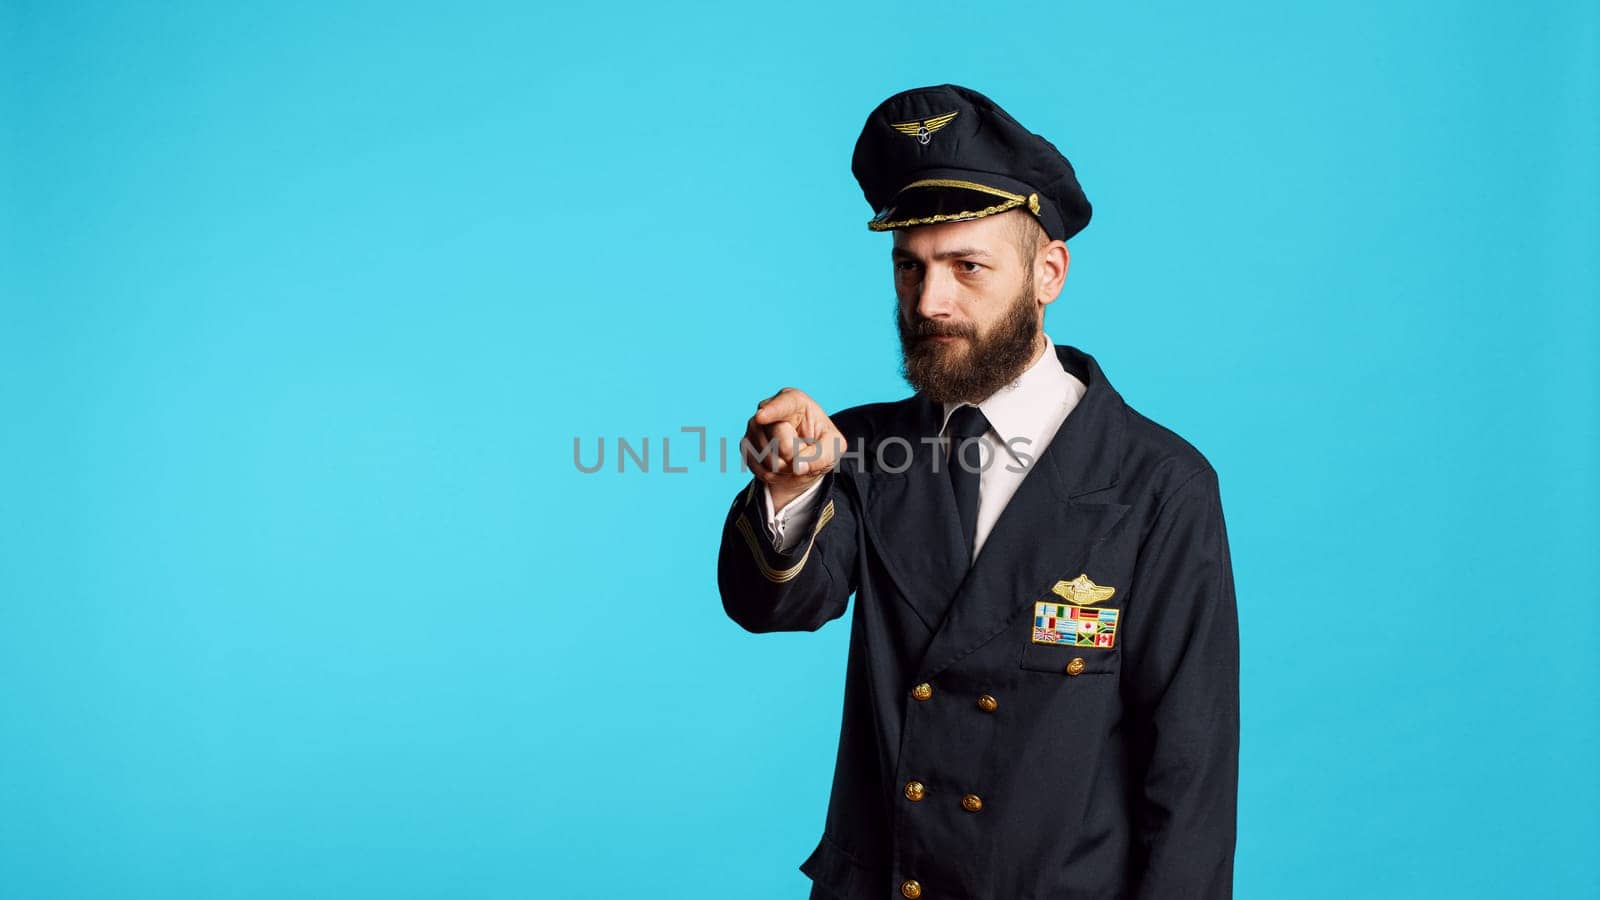 Plane captain in aviation uniform pointing at camera by DCStudio